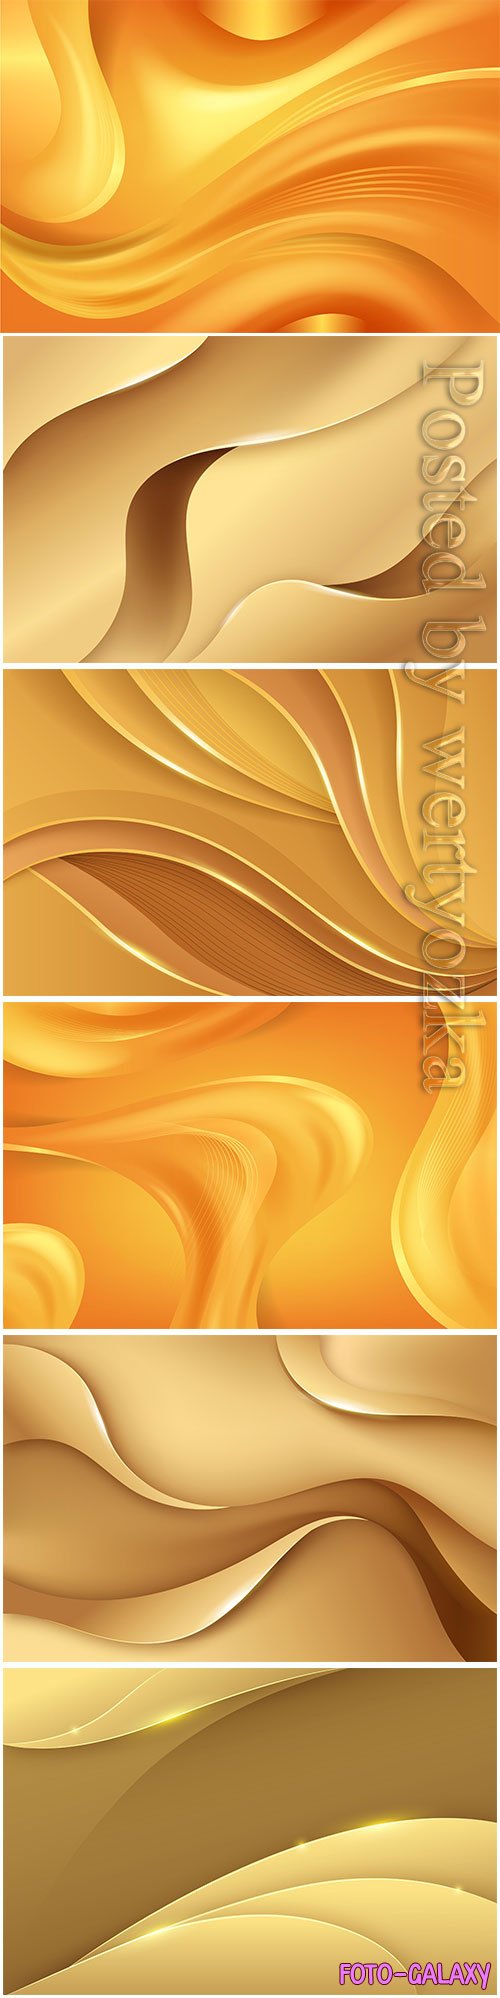 Gold vector backgrounds with with waves